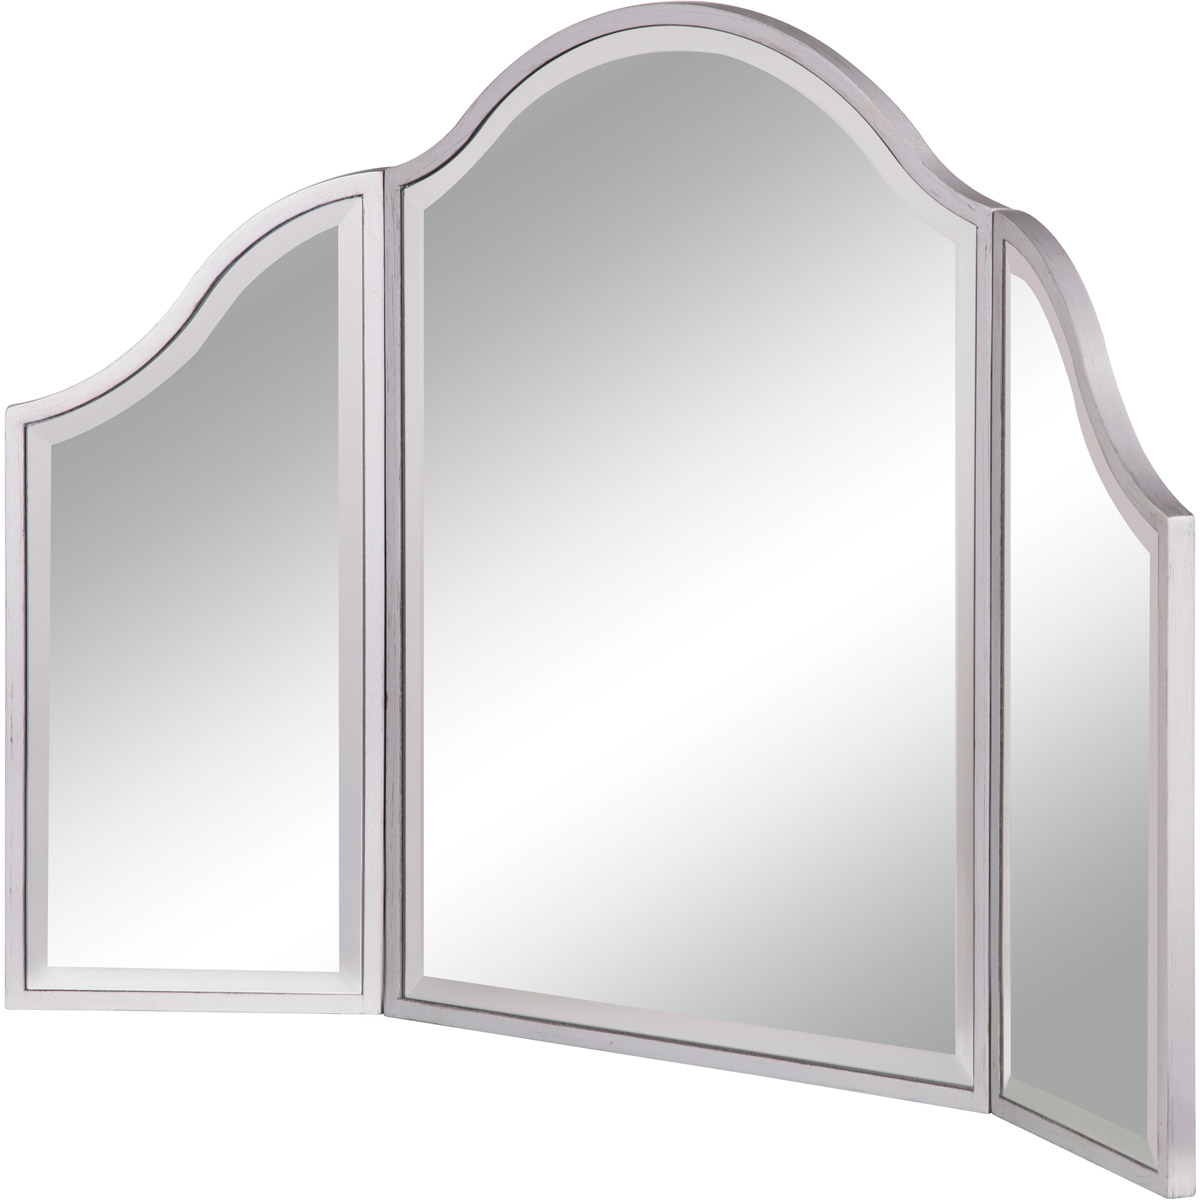 Mf6-1042s Dressing Mirror Silver Paint - Hand Rubbed, Antique Silver - 37 X 24 In.